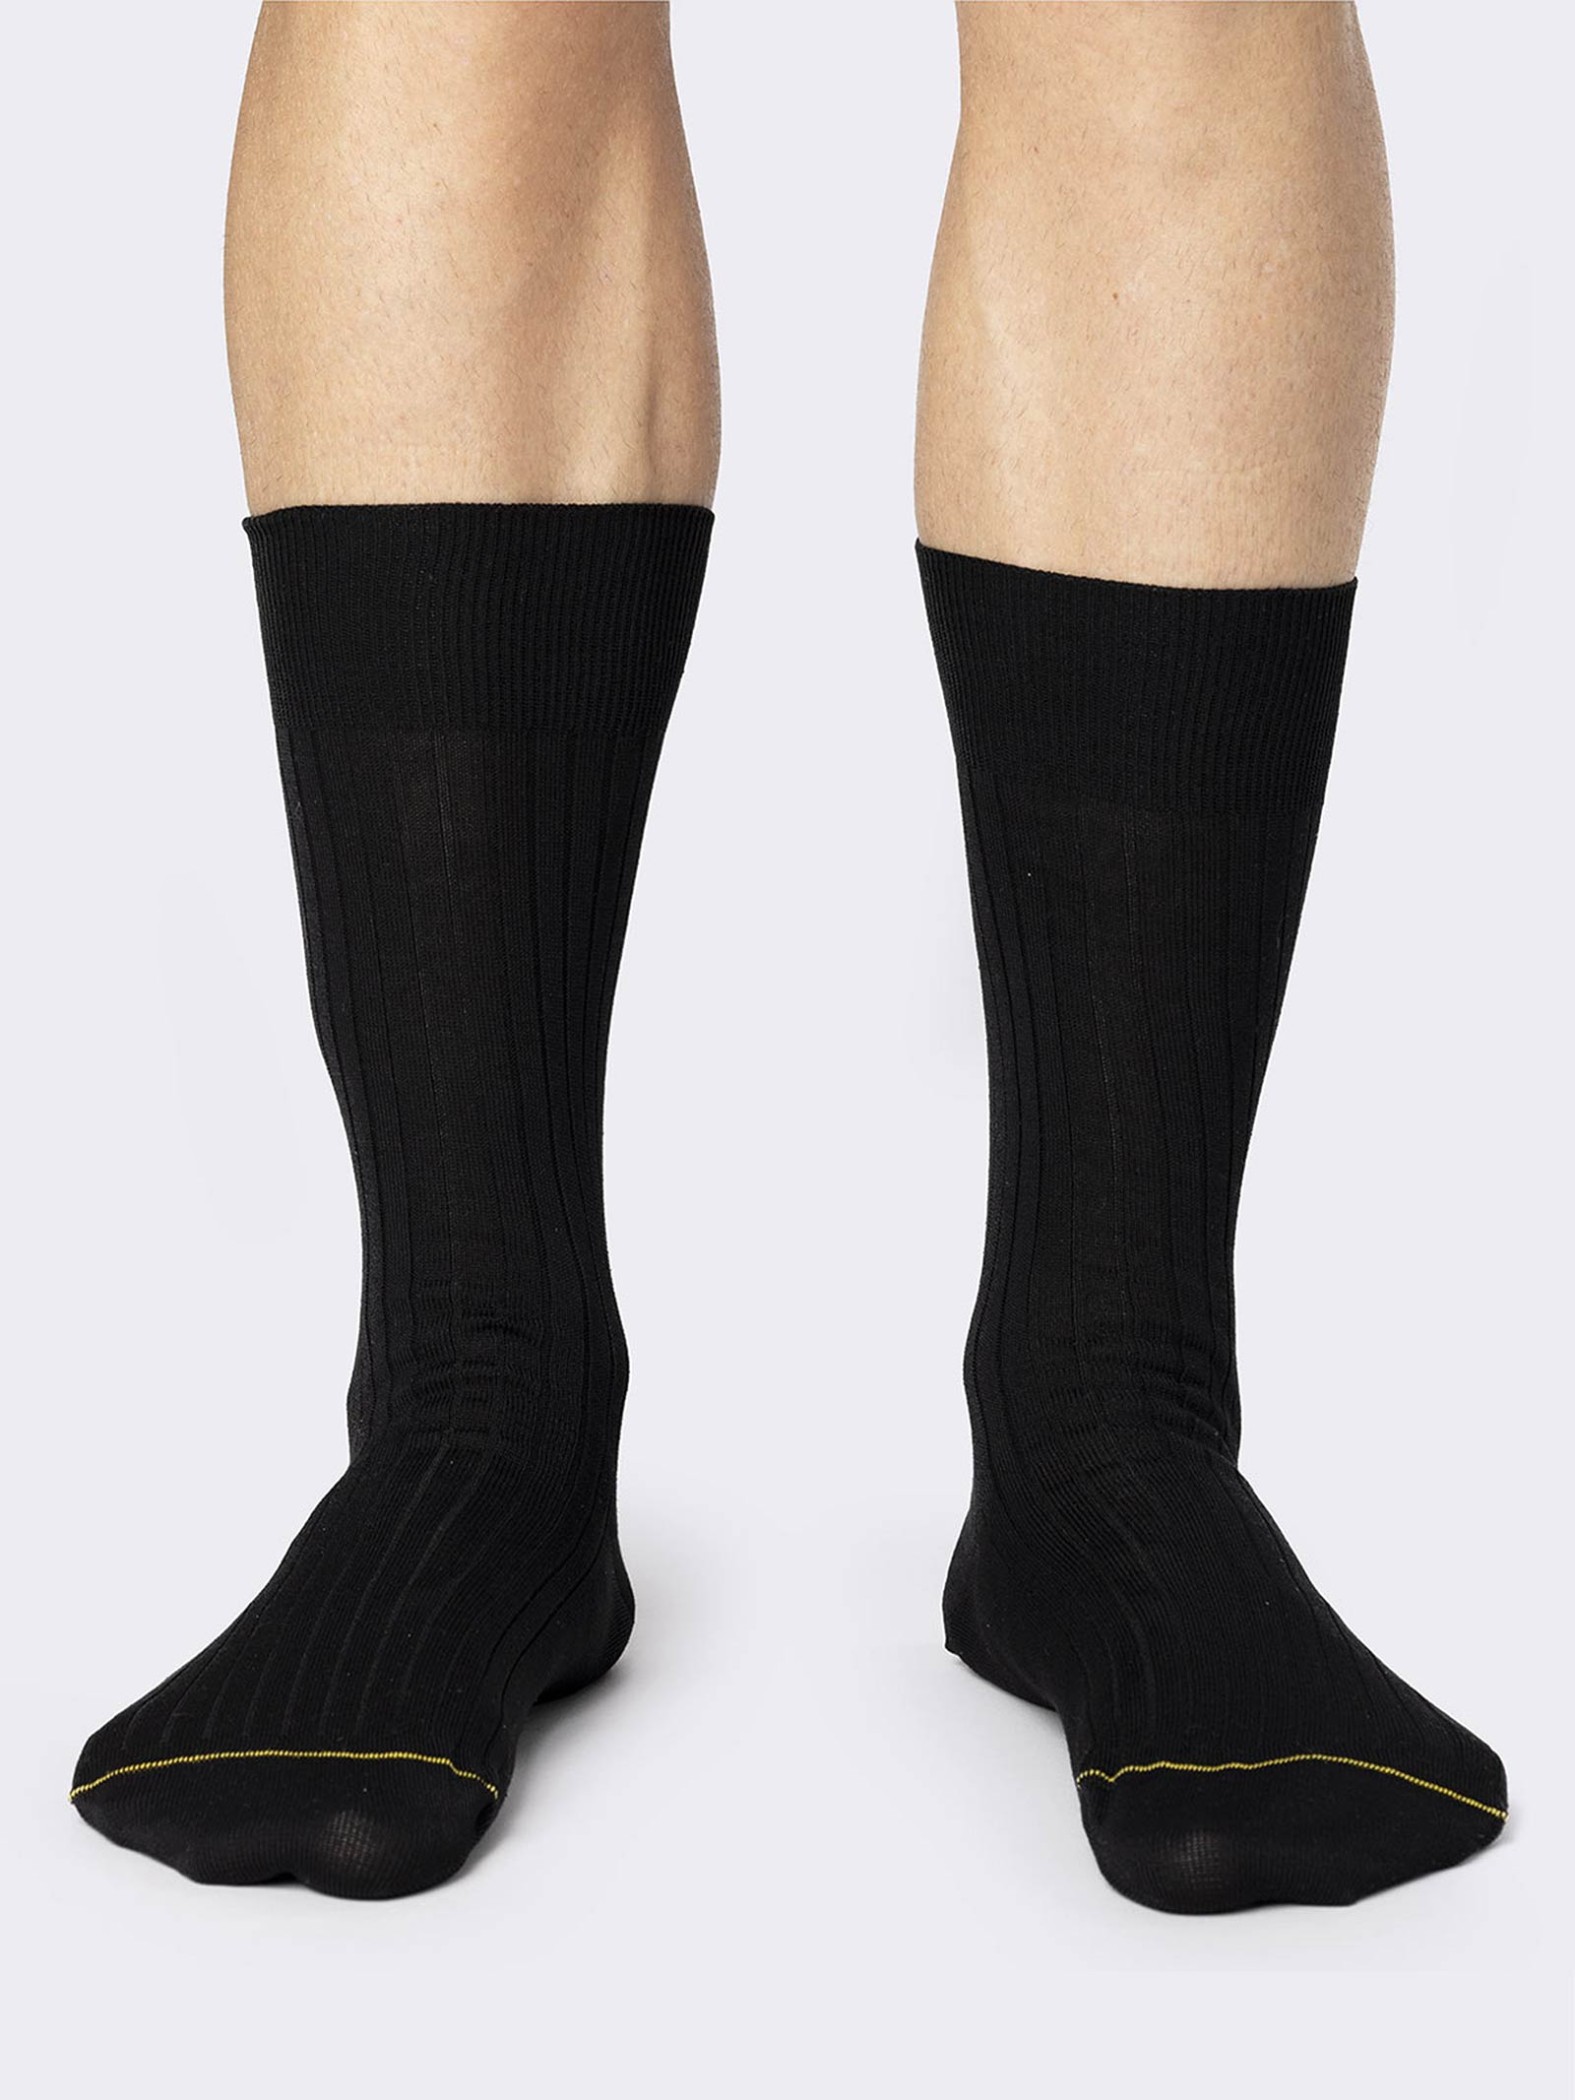 Mid-calf short classic rib socks, medium weight cotton - reinforced toe - Made in Italy